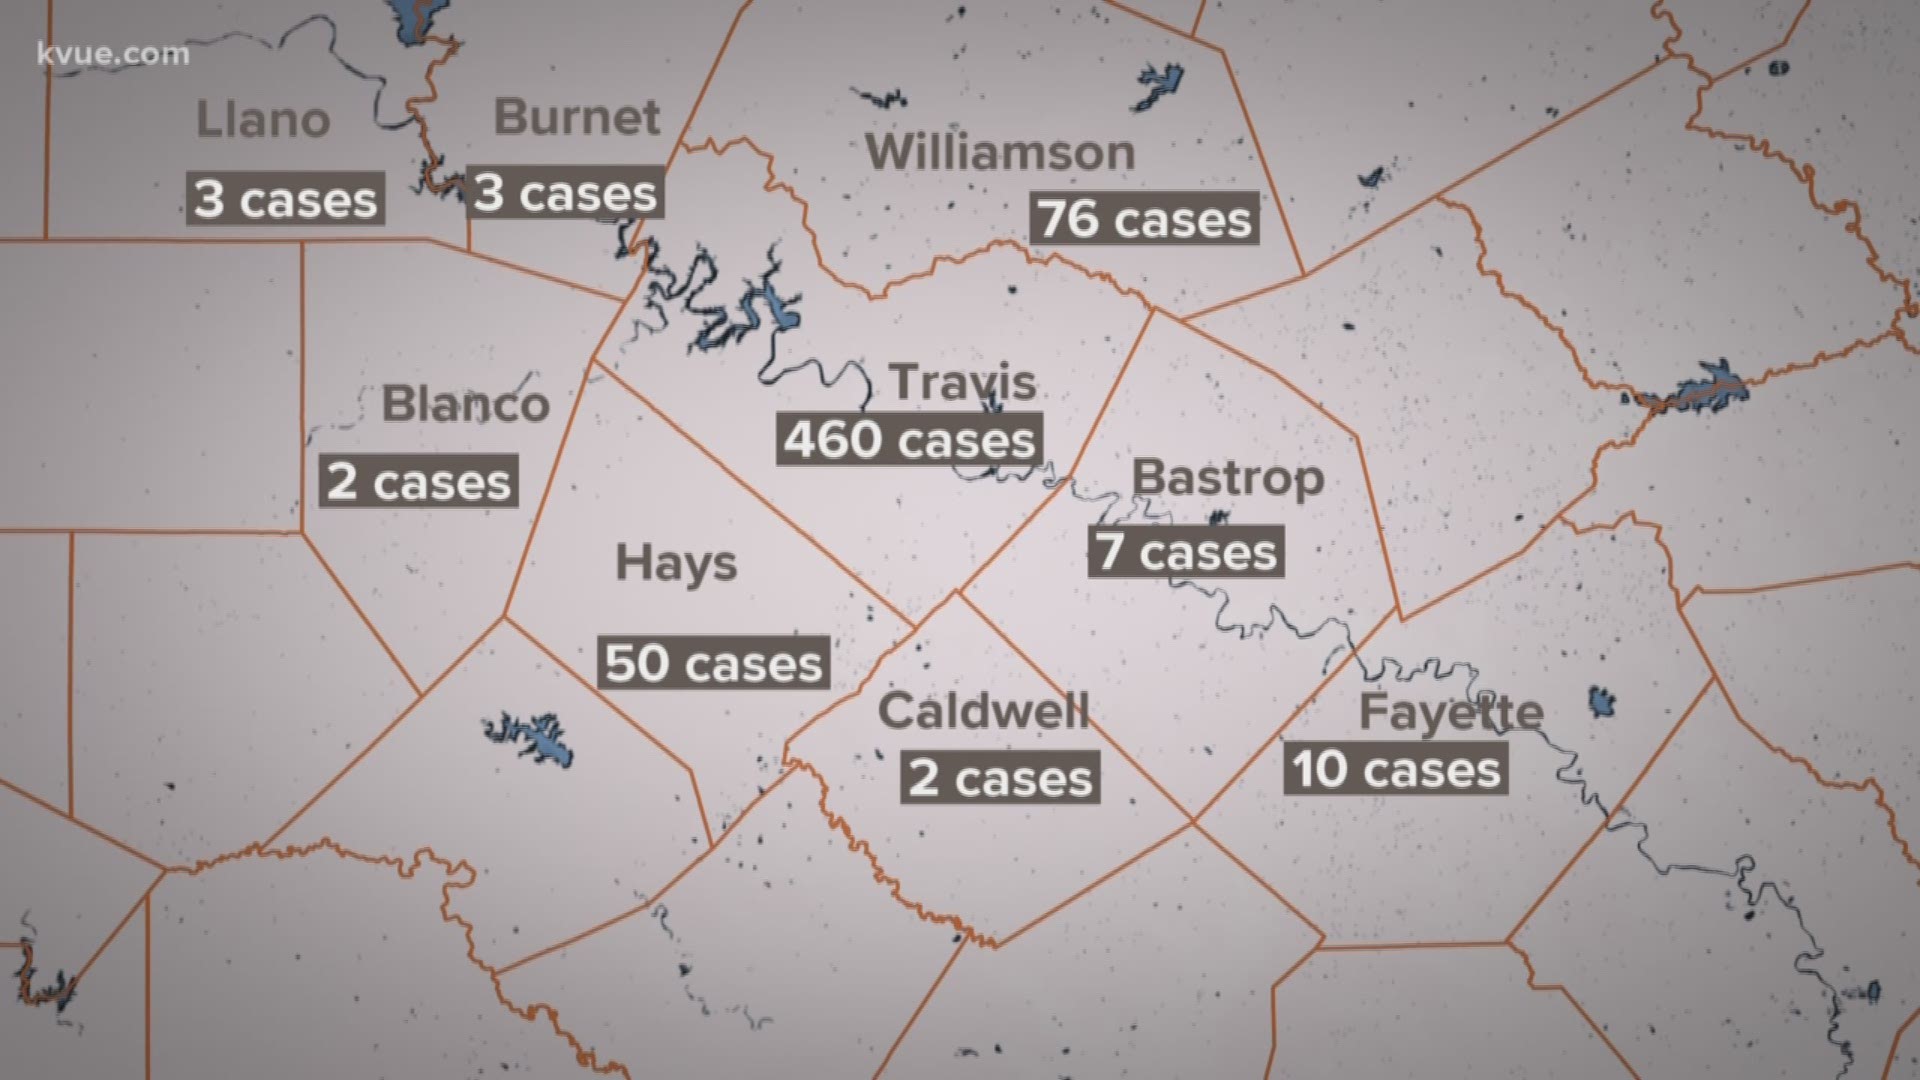 There were 76 confirmed cases in Williamson County as of Saturday night.